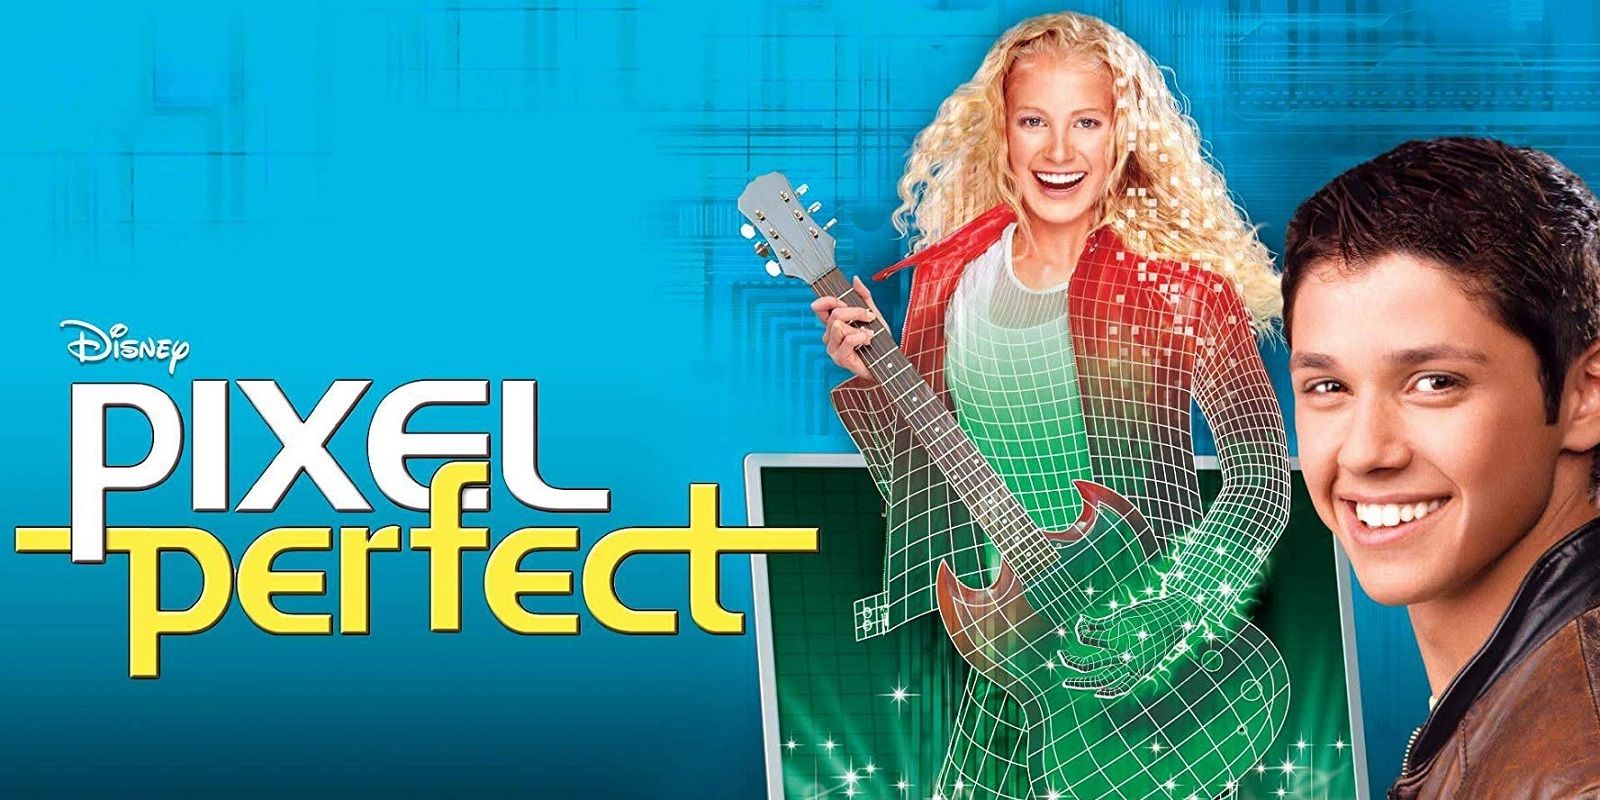 Poster for the Pixel Perfect film featuring the main characters.